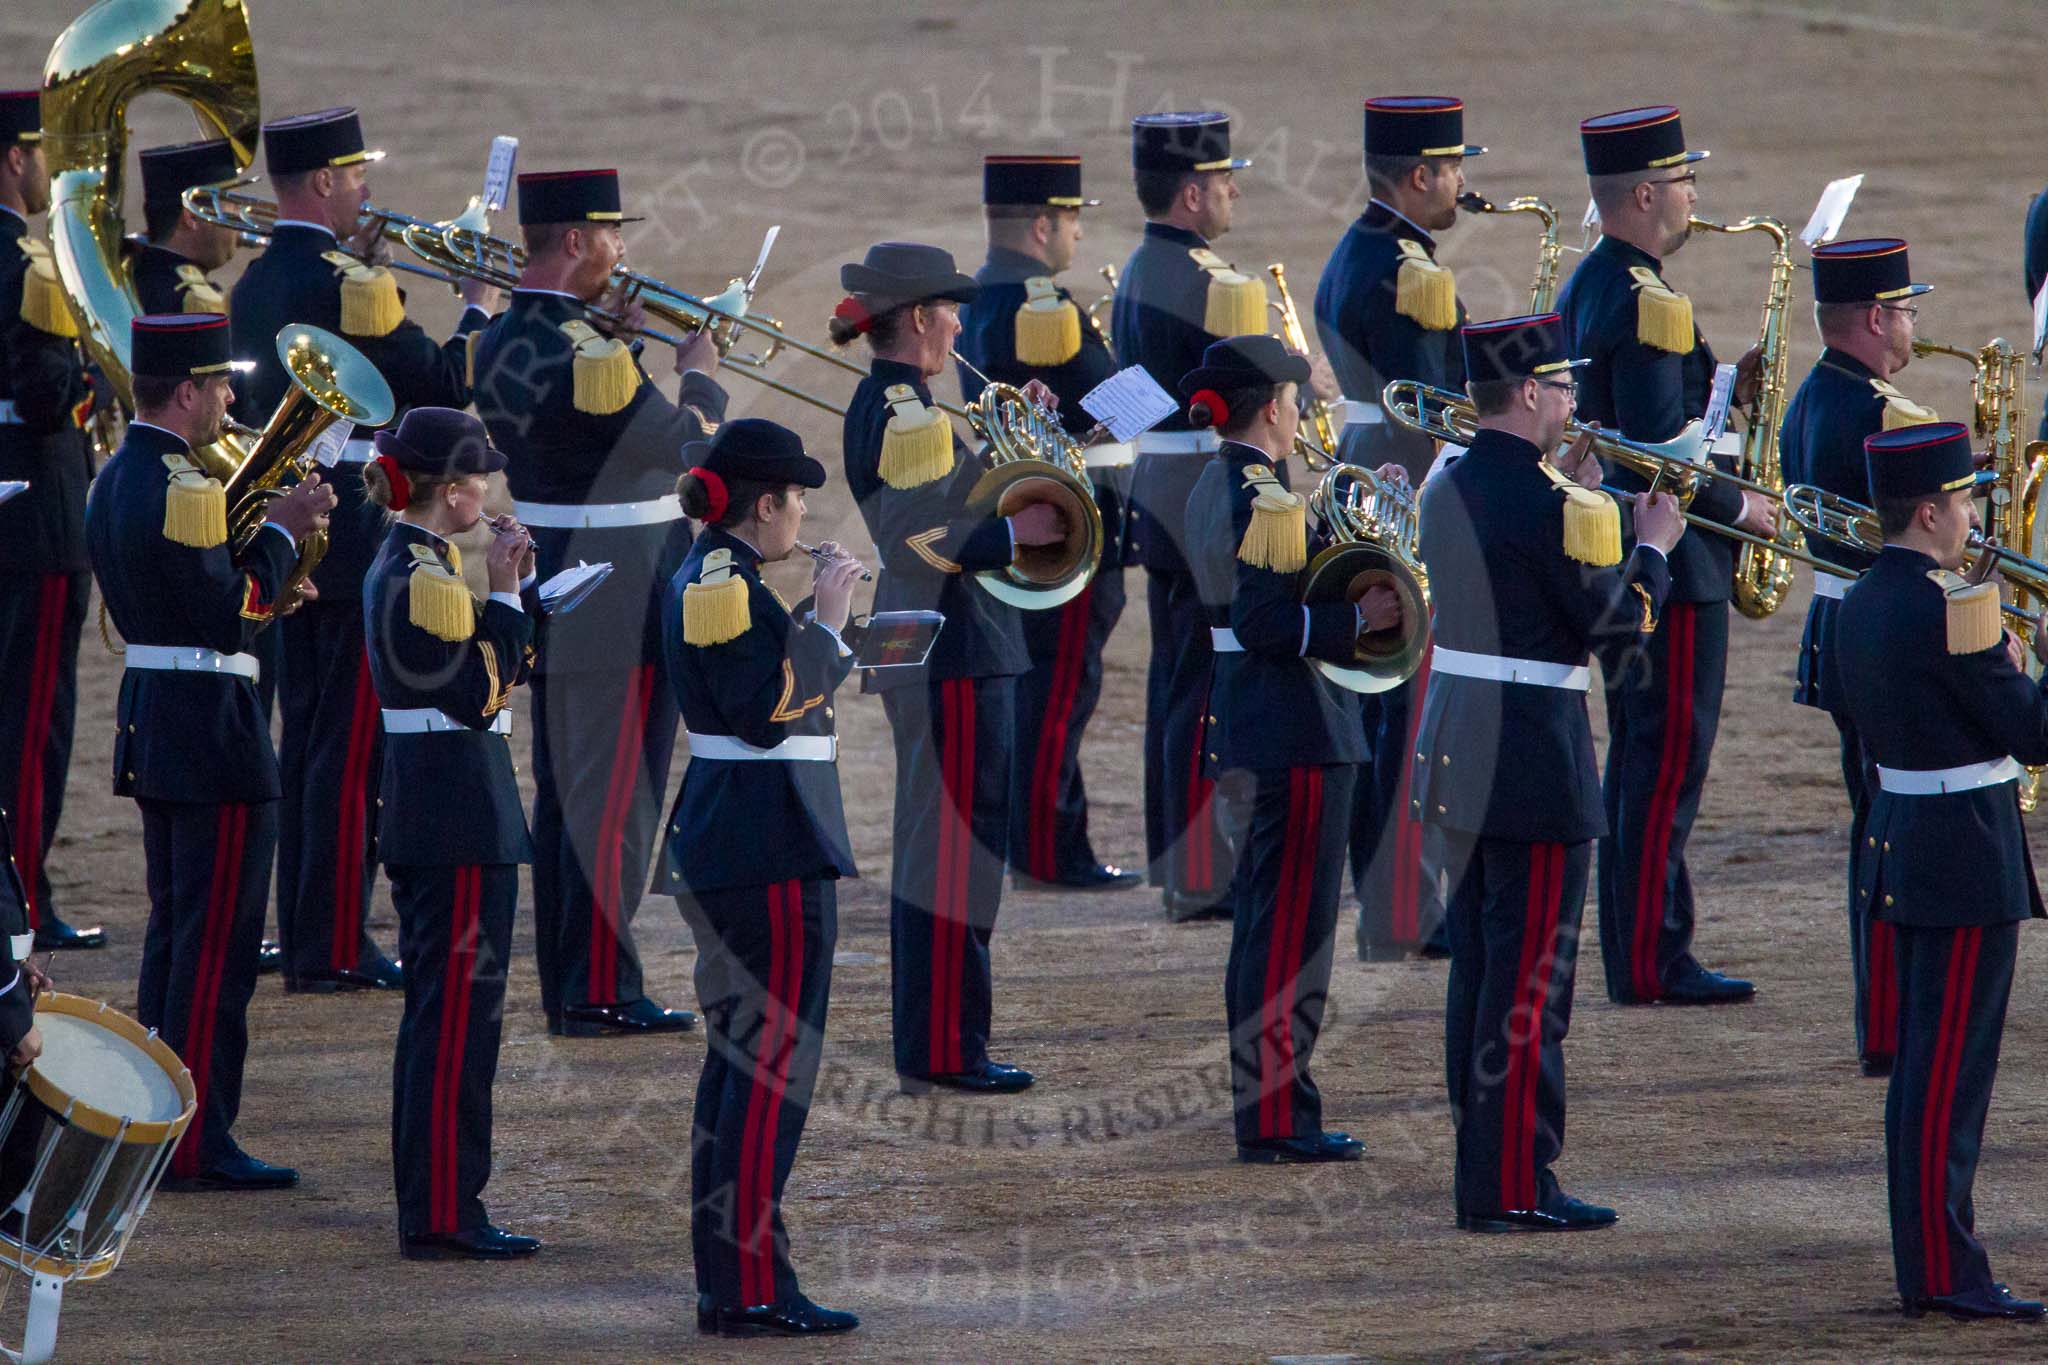 Beating Retreat 2014.
Horse Guards Parade, Westminster,
London SW1A,

United Kingdom,
on 11 June 2014 at 21:22, image #323